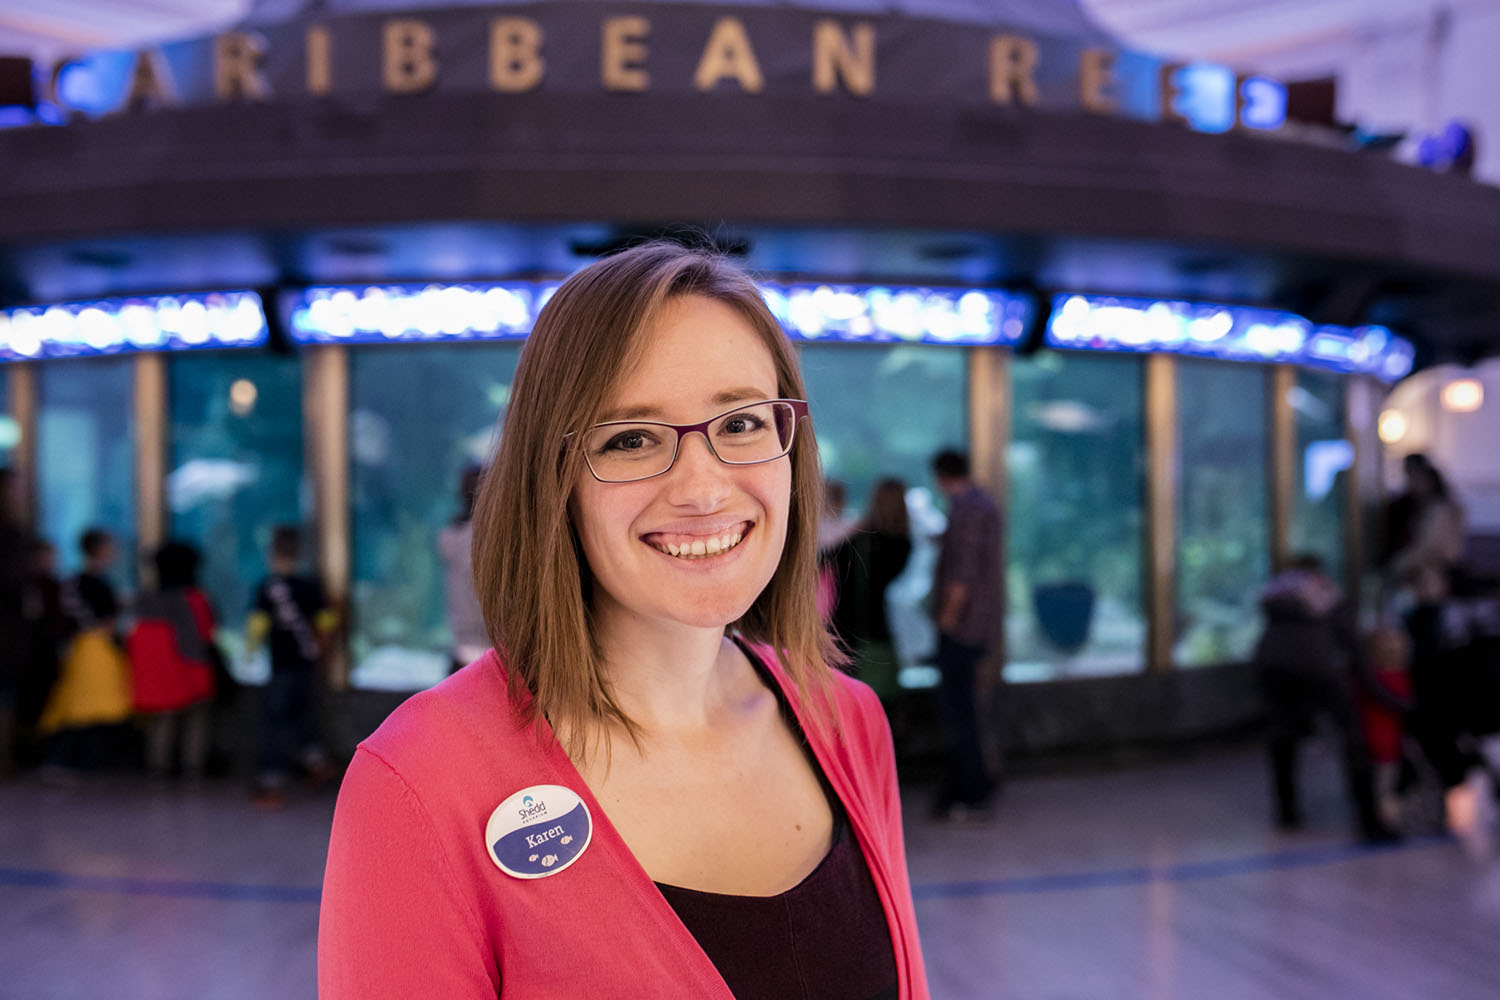 Karen is white person with shoulder-length straight brown hair, metal-frame glasses, and a bright pink cardigan stands in front of a circular 90,000-gallon aquarium with the words CARIBBEAN REEF in large lettering around the top. They are wearing a Shedd Aquarium nametag.